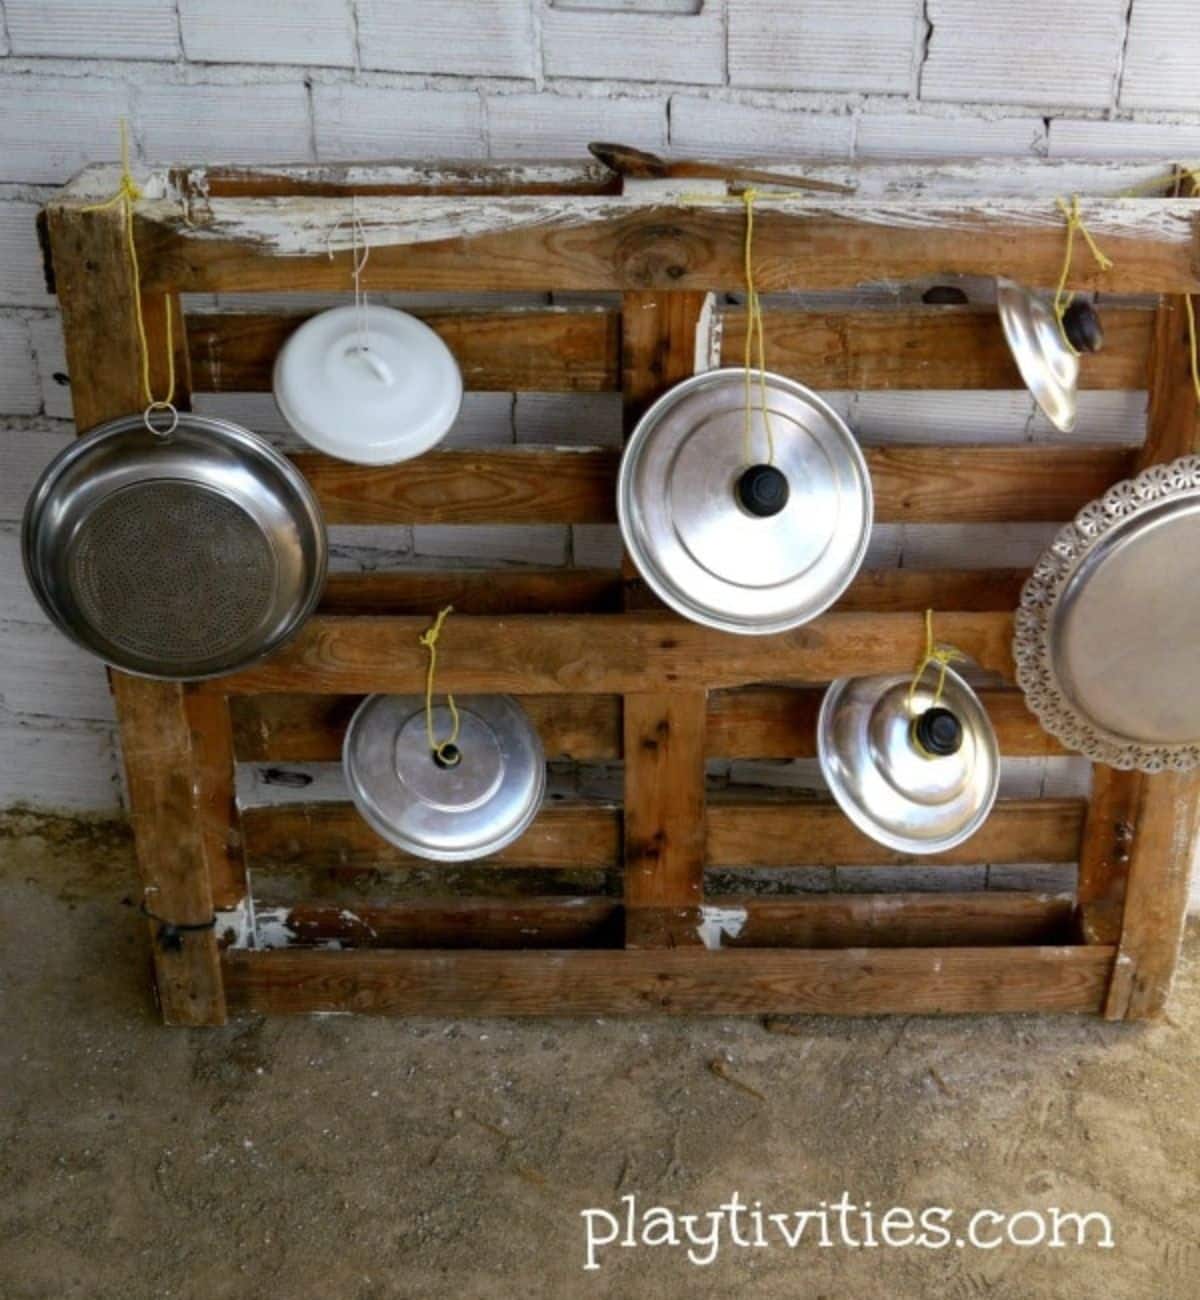 Homemade Drums from Pot Lids on w wooden palet.